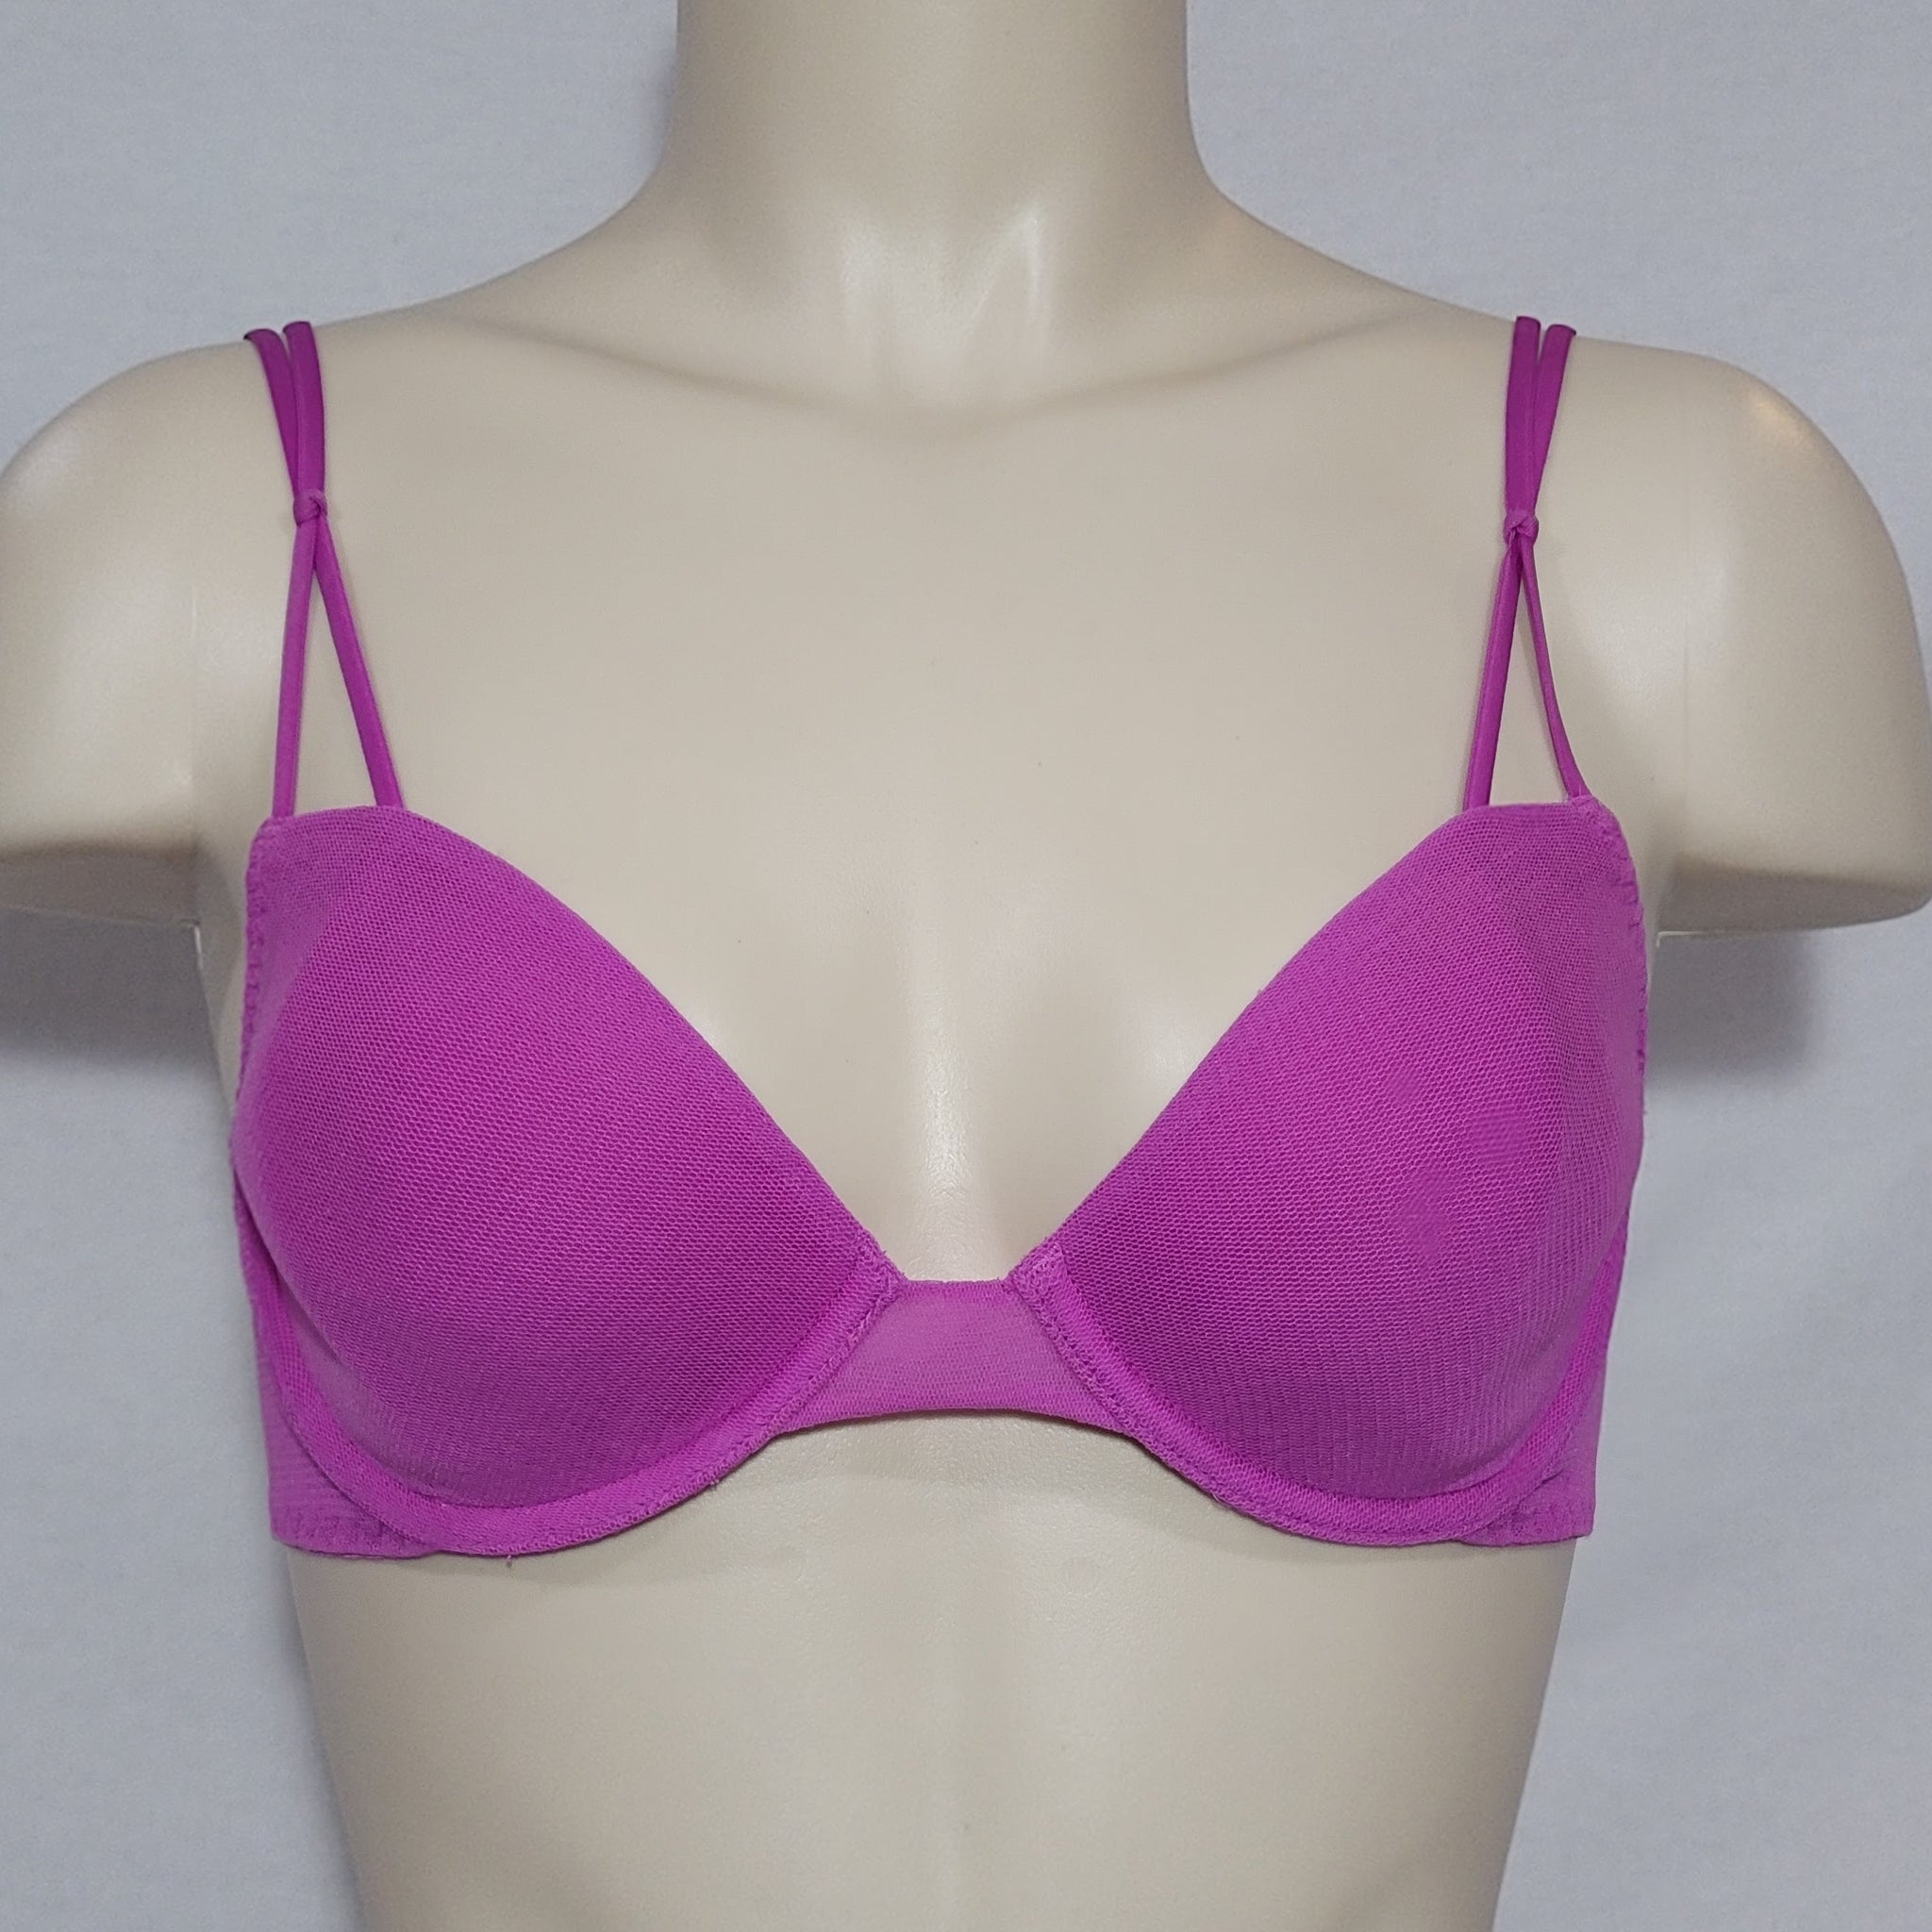 Lily of France Push Up Bra 34C and Victoria's Secret One Size